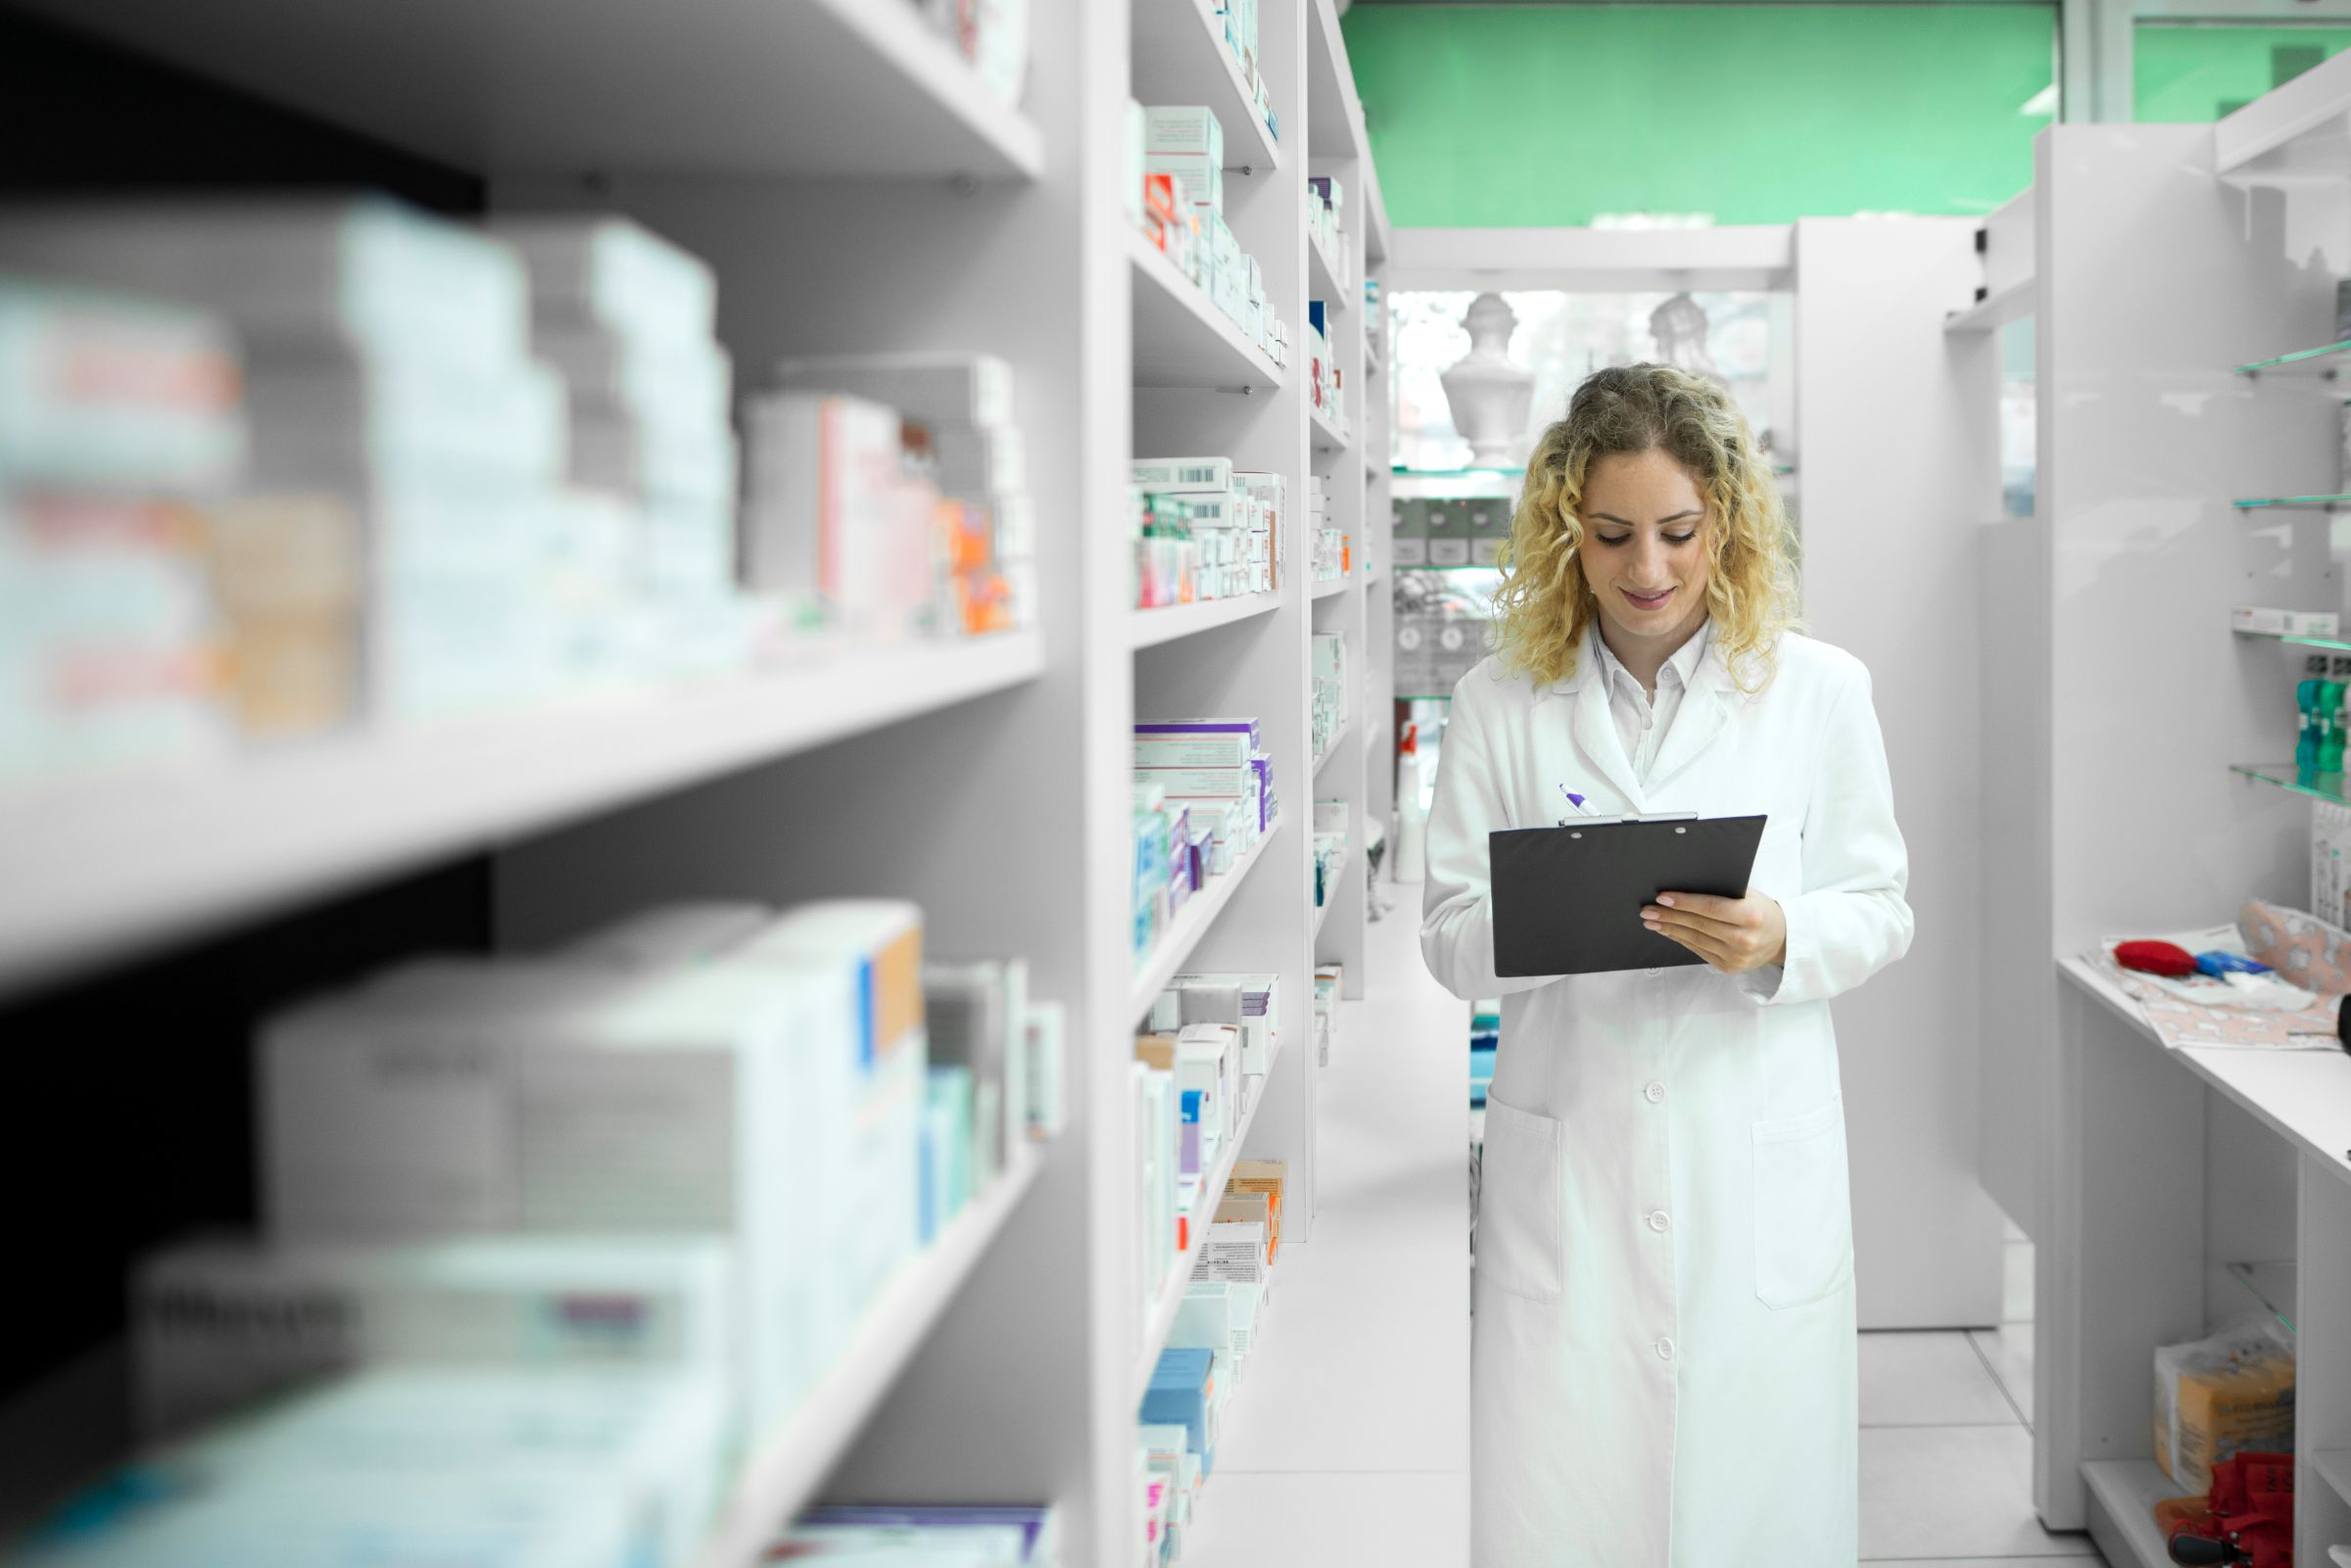 Pharmacist White Uniform Walking By Shelf With Medicines Checking Inventory